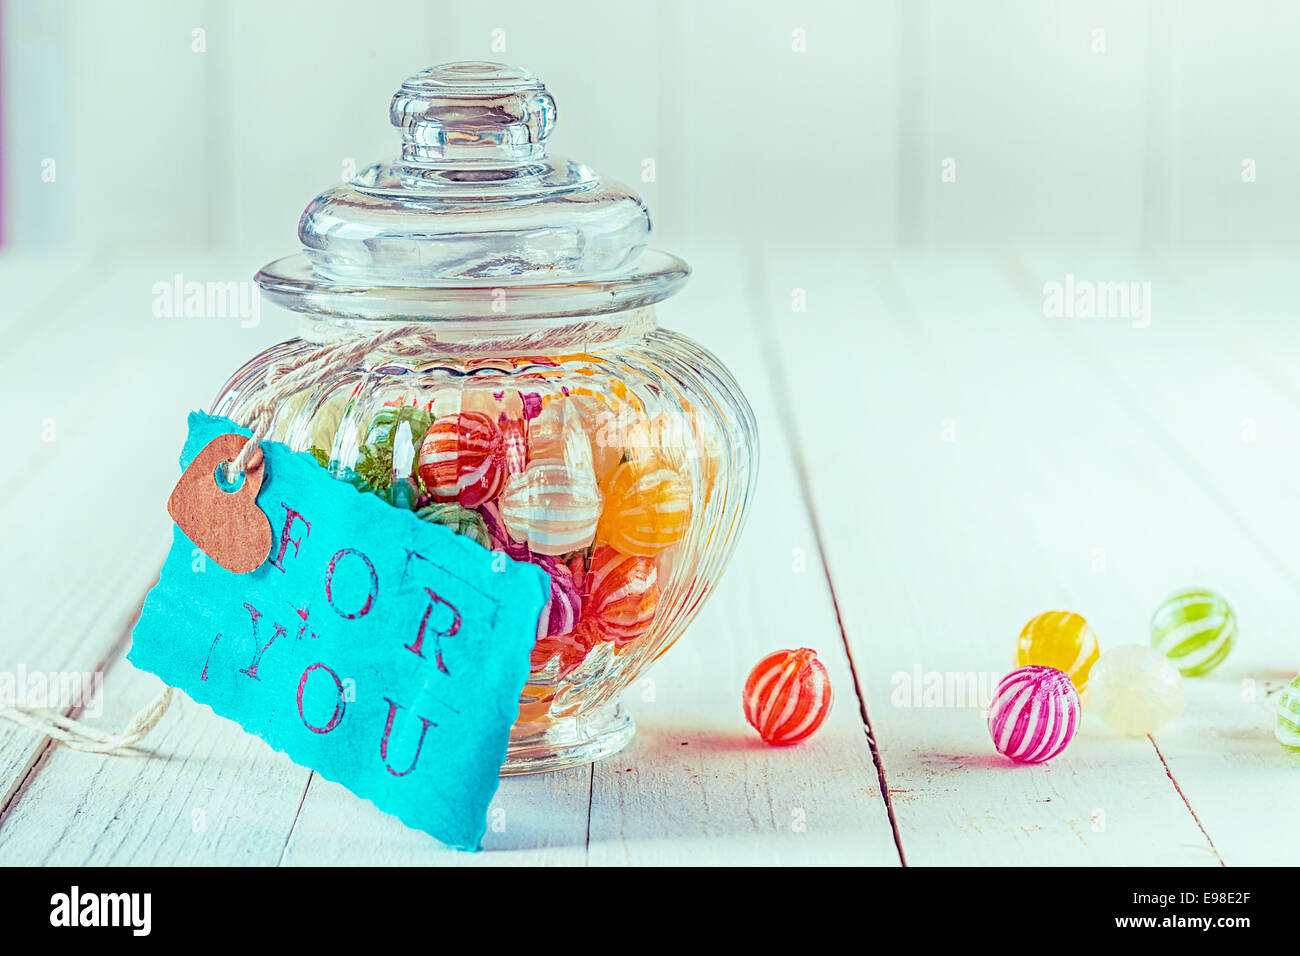 Close-up view of an antique candy jar filled with colorful candies with a blue tag with a romantic, For You, written on a wooden background Stock Photo